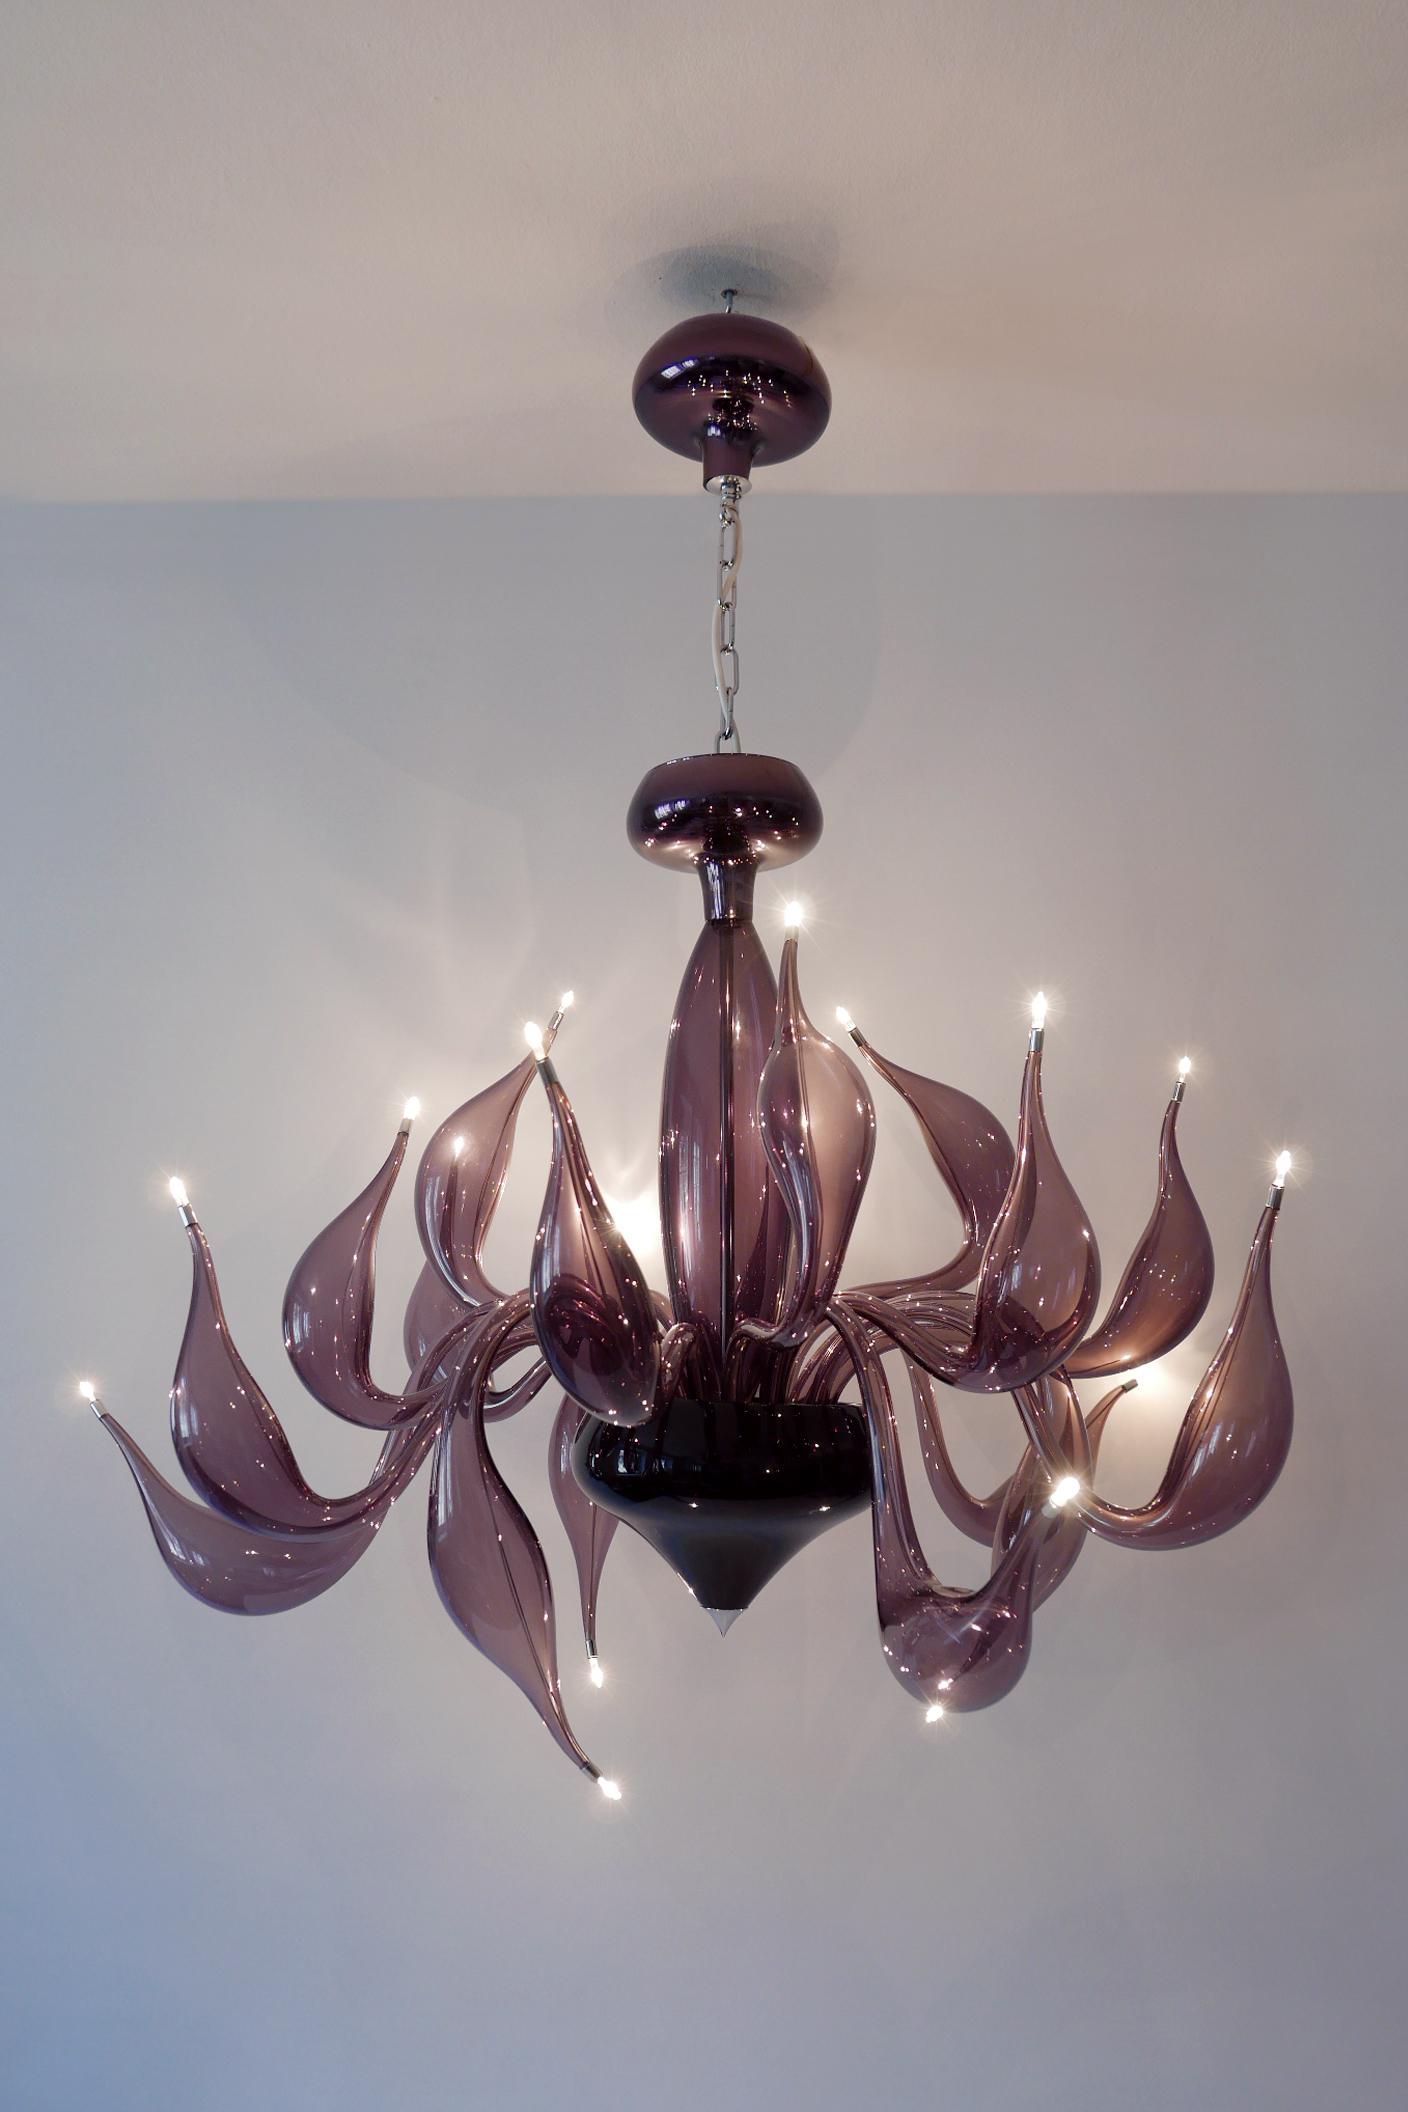 Italian Sculptural Lu Murano Chandelier 18 Lights by Fabio Fornasier, 2004, Italy For Sale